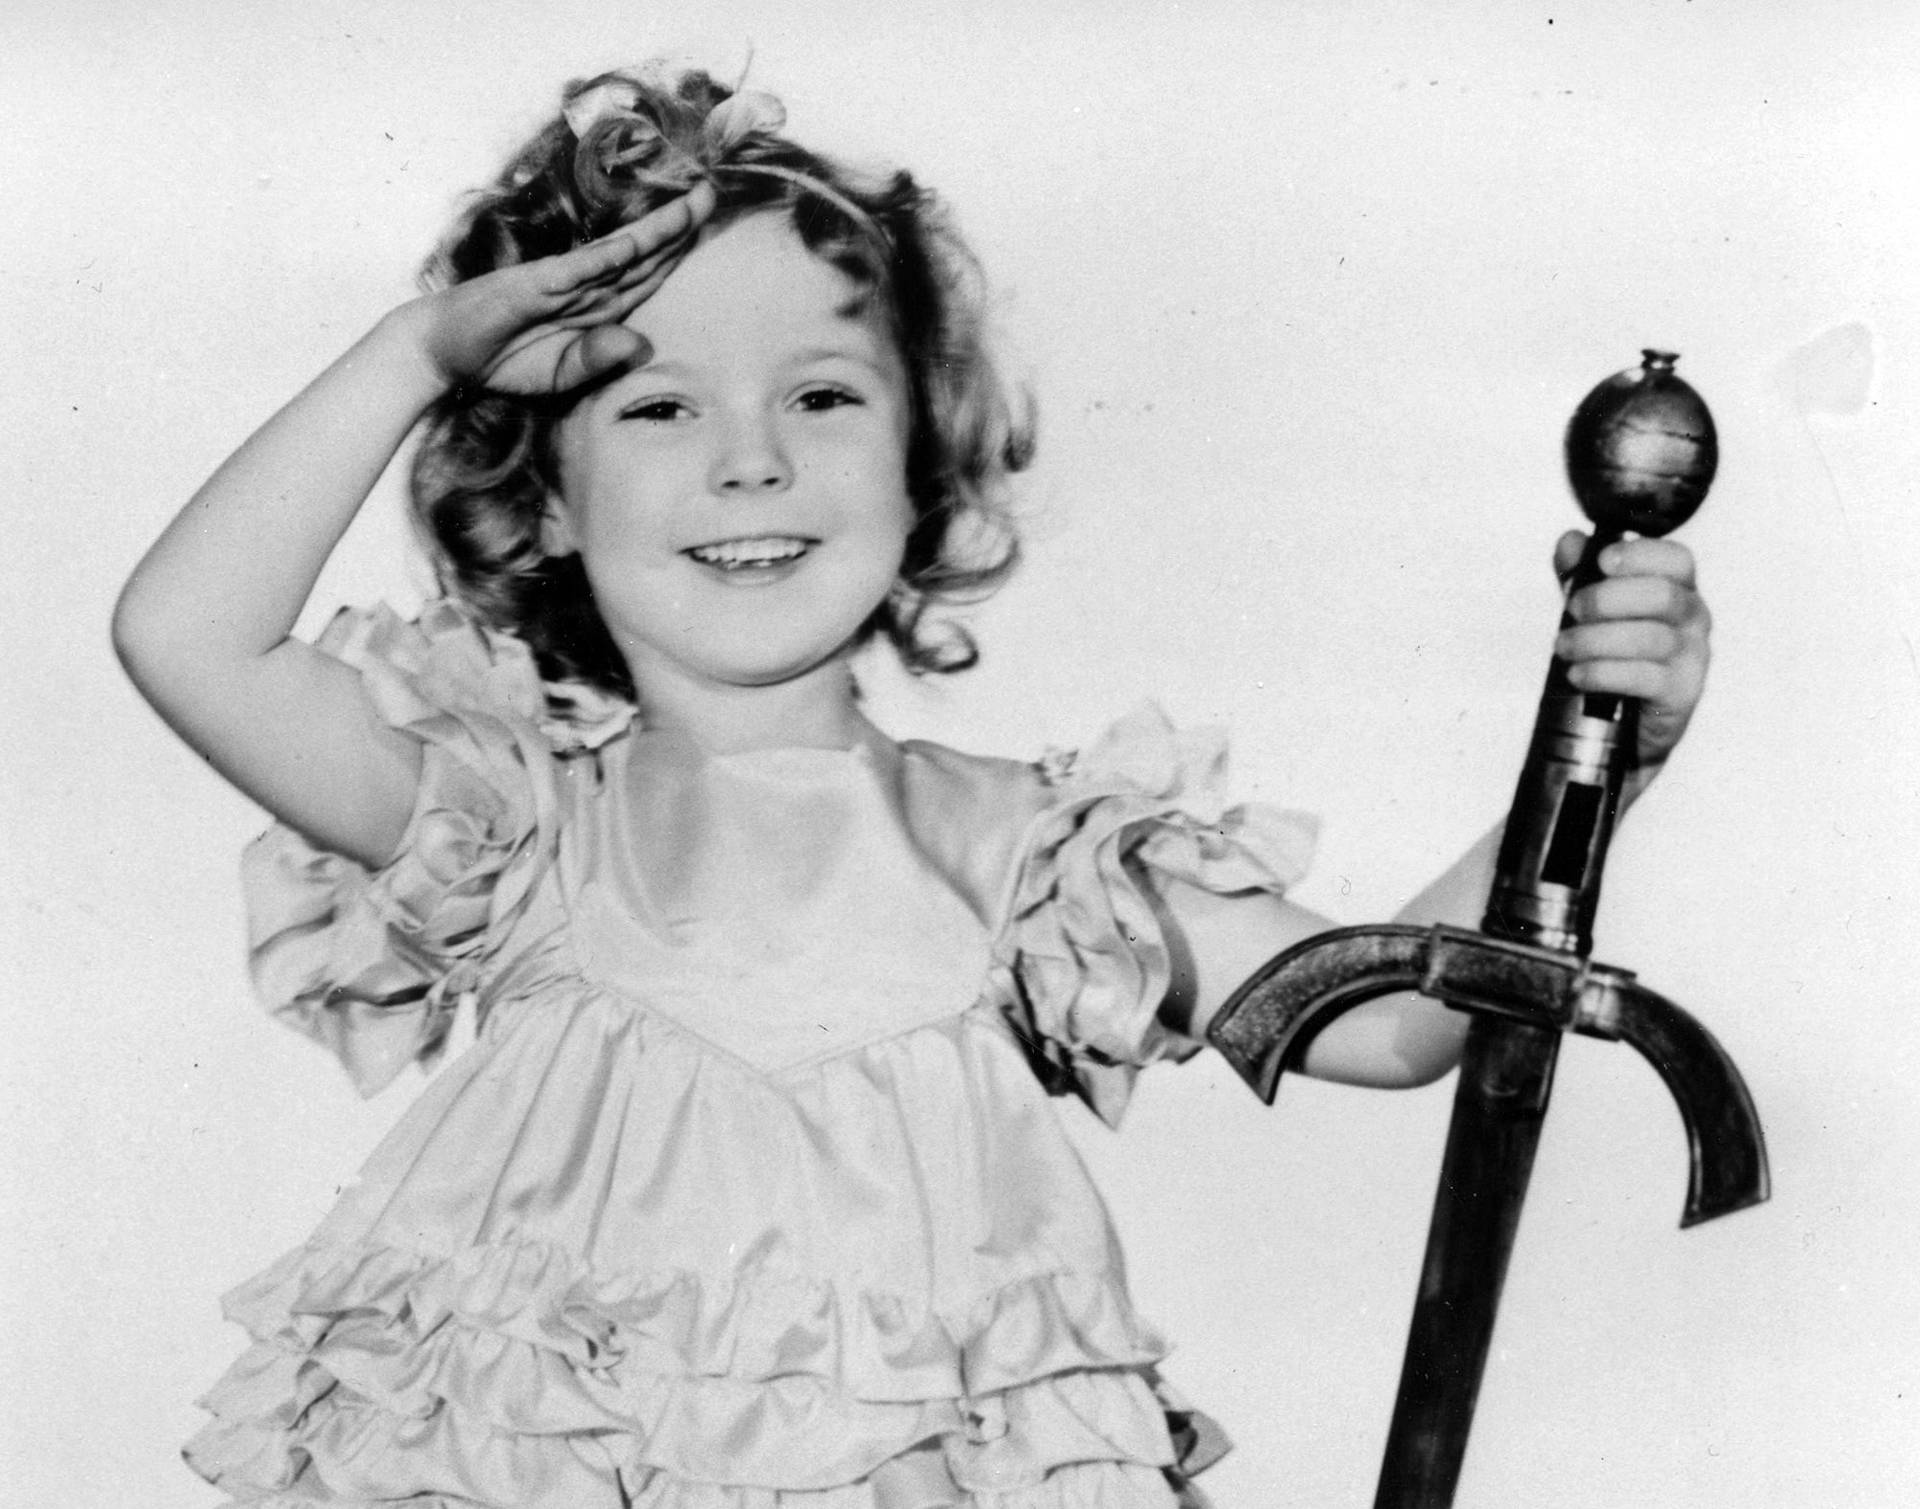 Snappy Pose Shirley Temple